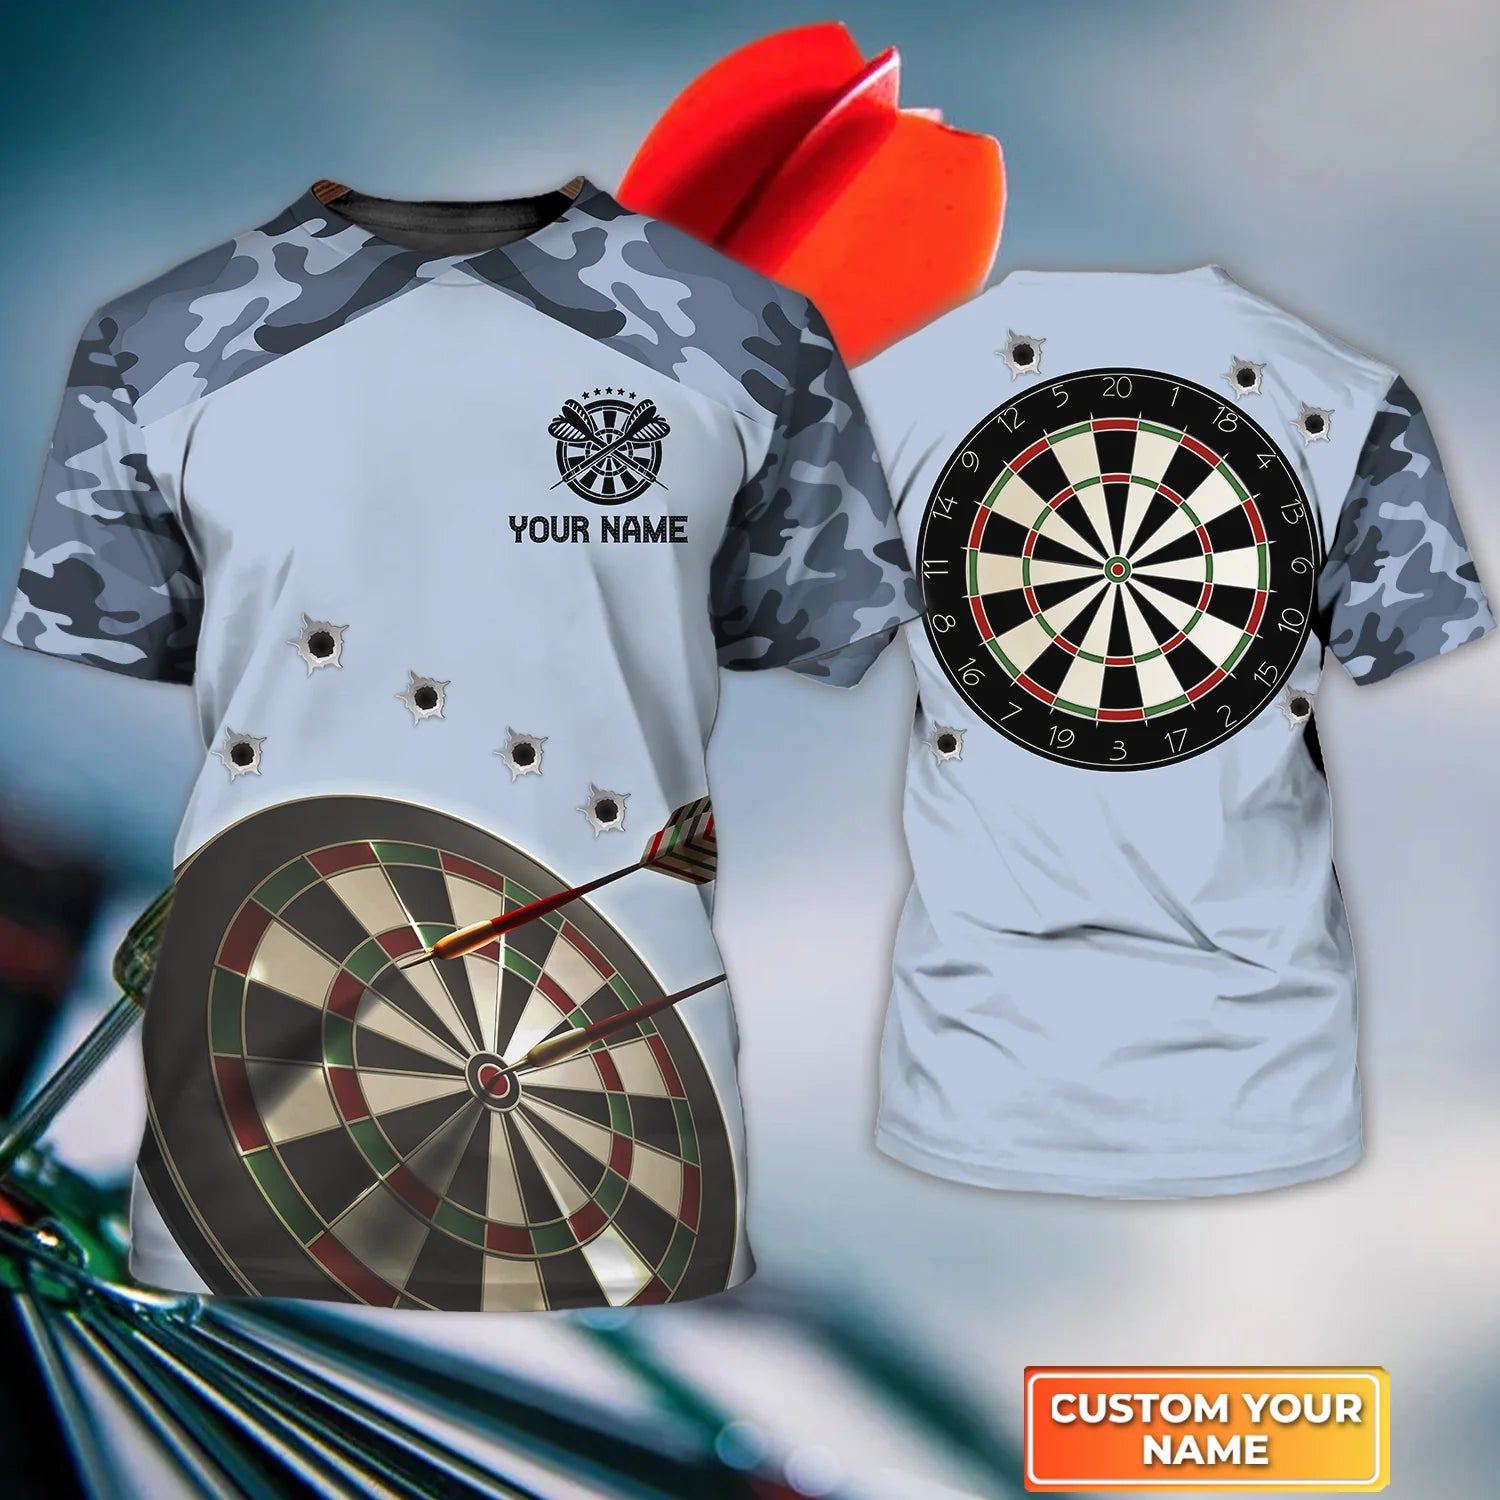 Whirlpool Bullseye Dartboard Personalized Name 3D Shark And Darts Tshirt For Dart Team Player – DT064